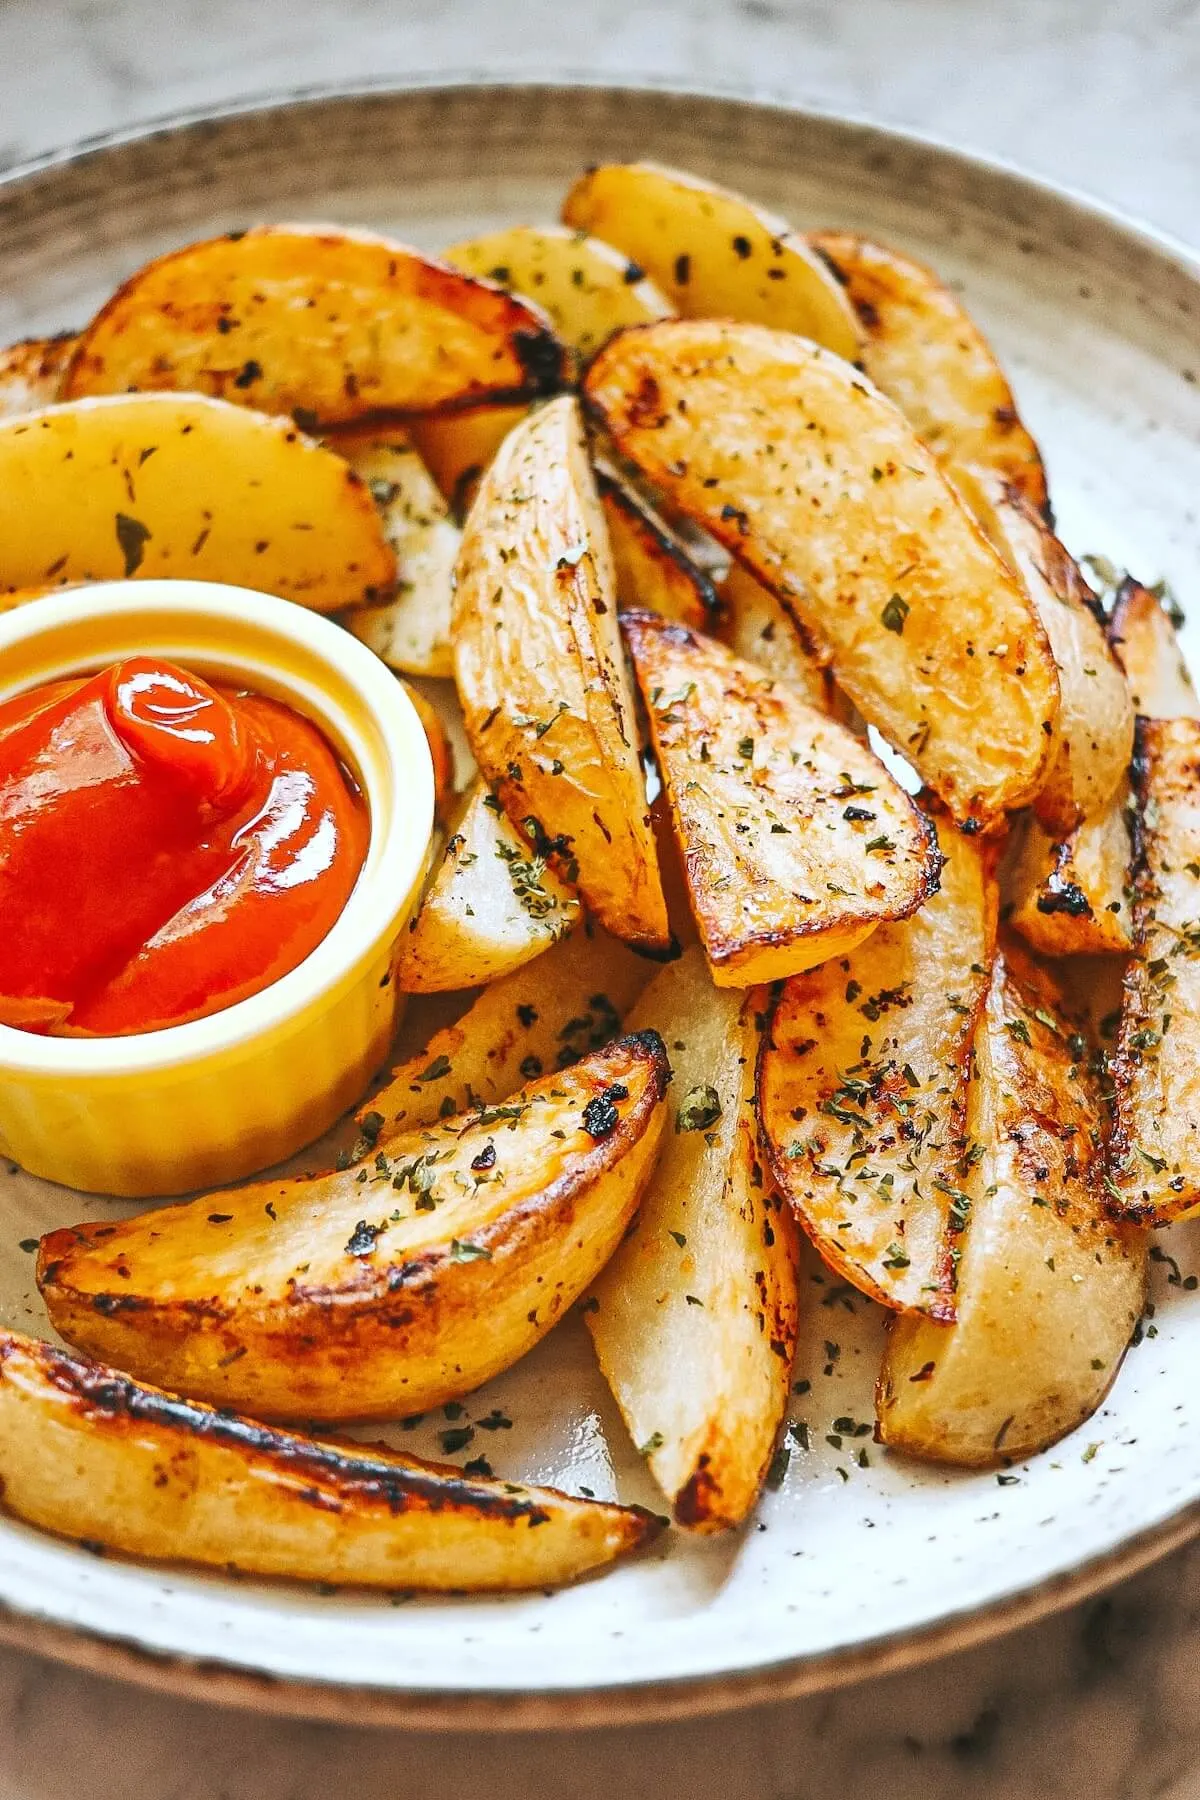 Potato wedges on a plate with tomato sauce